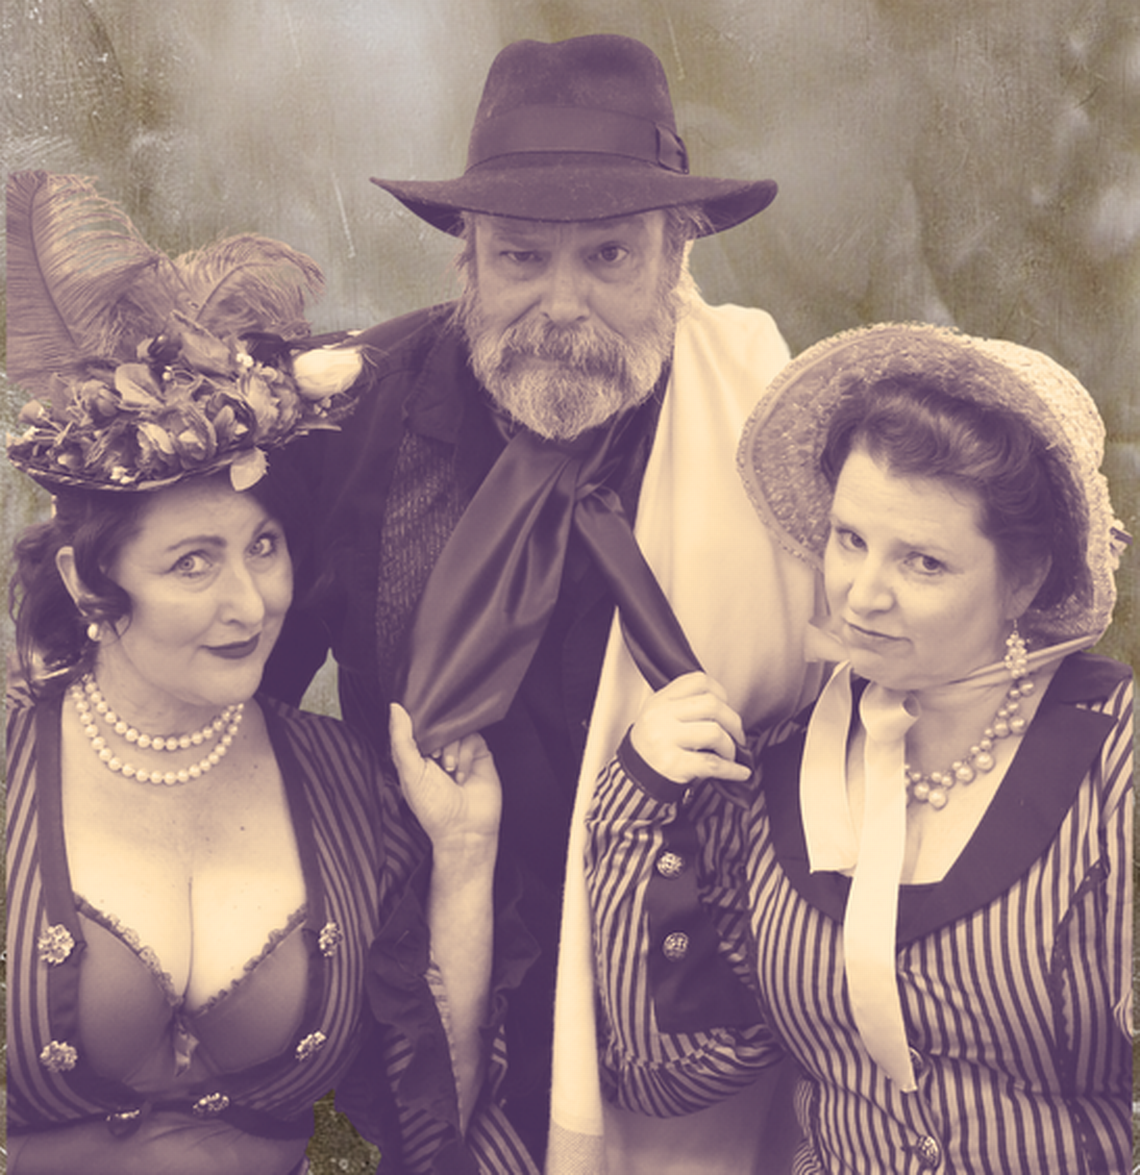 Bluegrass Community and Technical College Theatre program is collaborating with Antagonist Productions for a Summer Shakespeare run of shows of “Merry Wives of Windsor.”